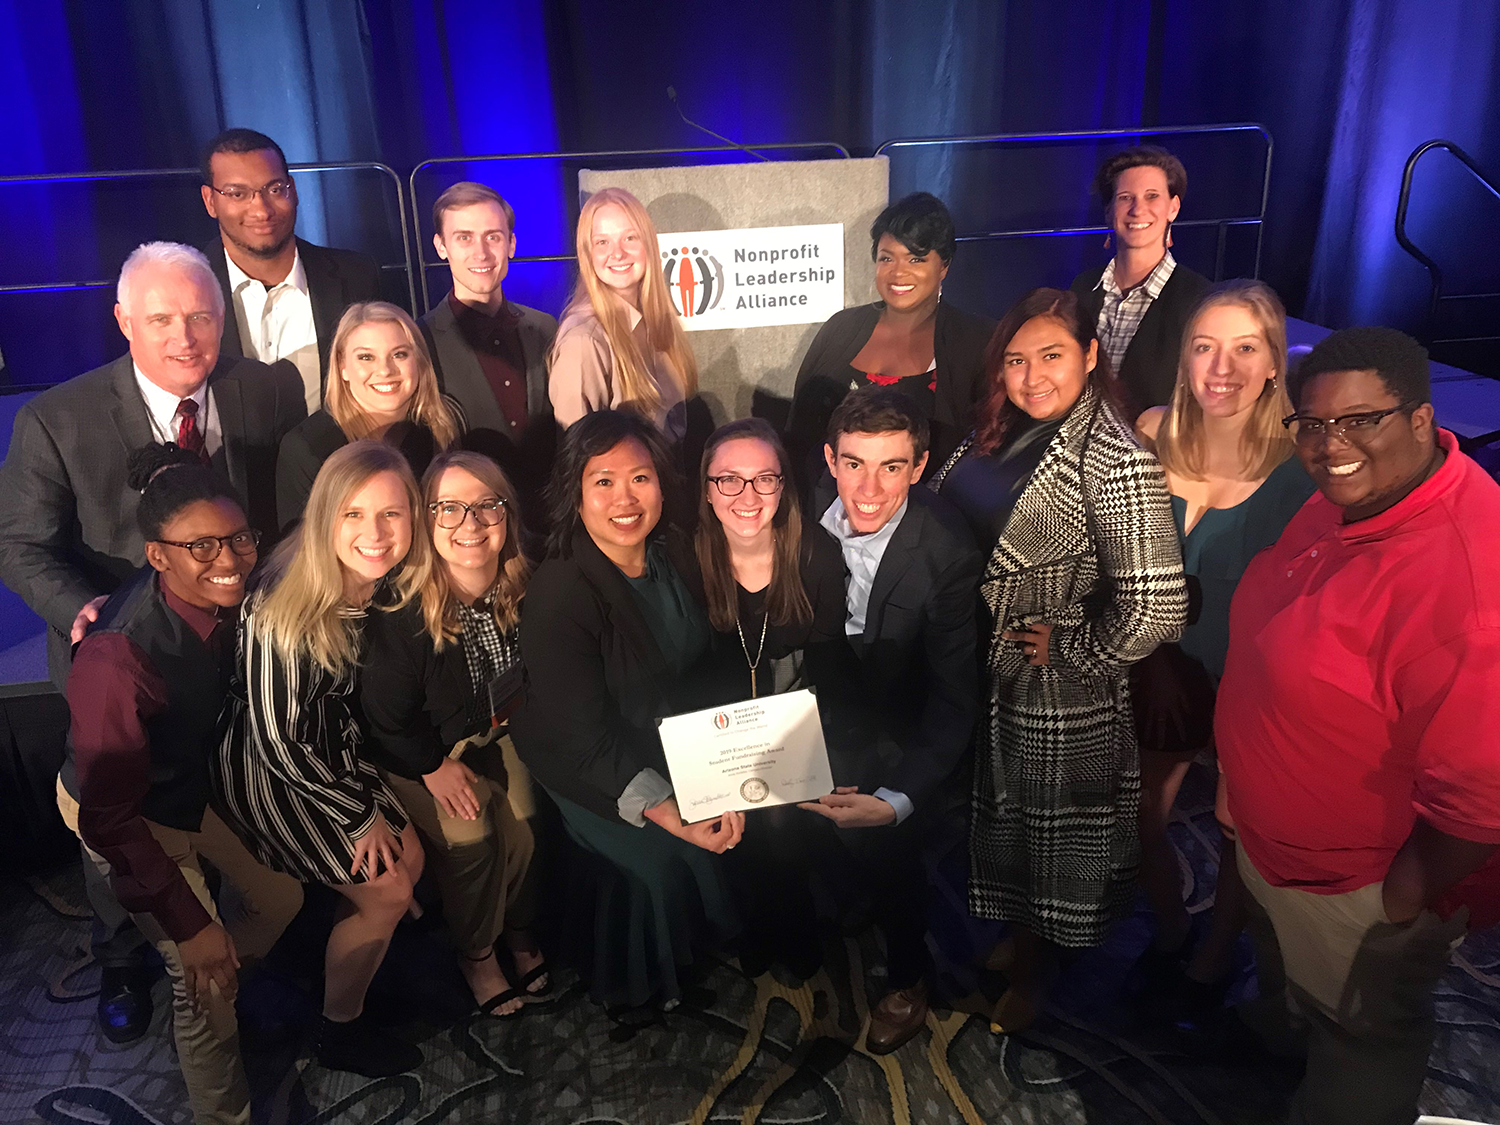 Inside a conference room, Nonprofit Leadership Alliance Student Association members pose with a paper cerificate for Excellence in Student Fundraising Award.